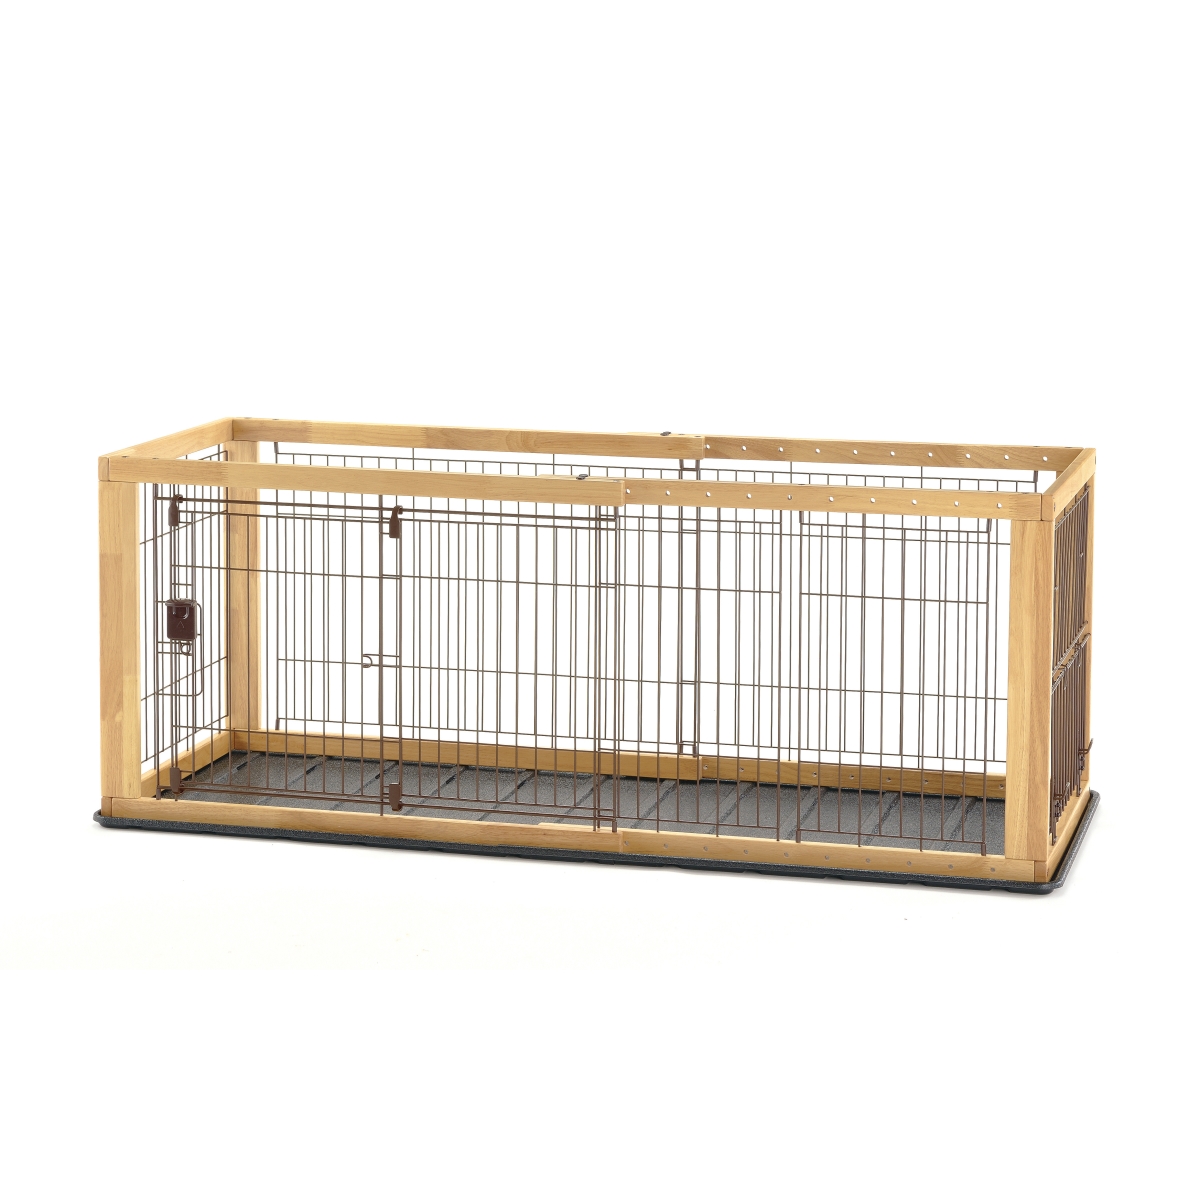 Picture of Richell 80007 Richell Expandable Pet Crate Small